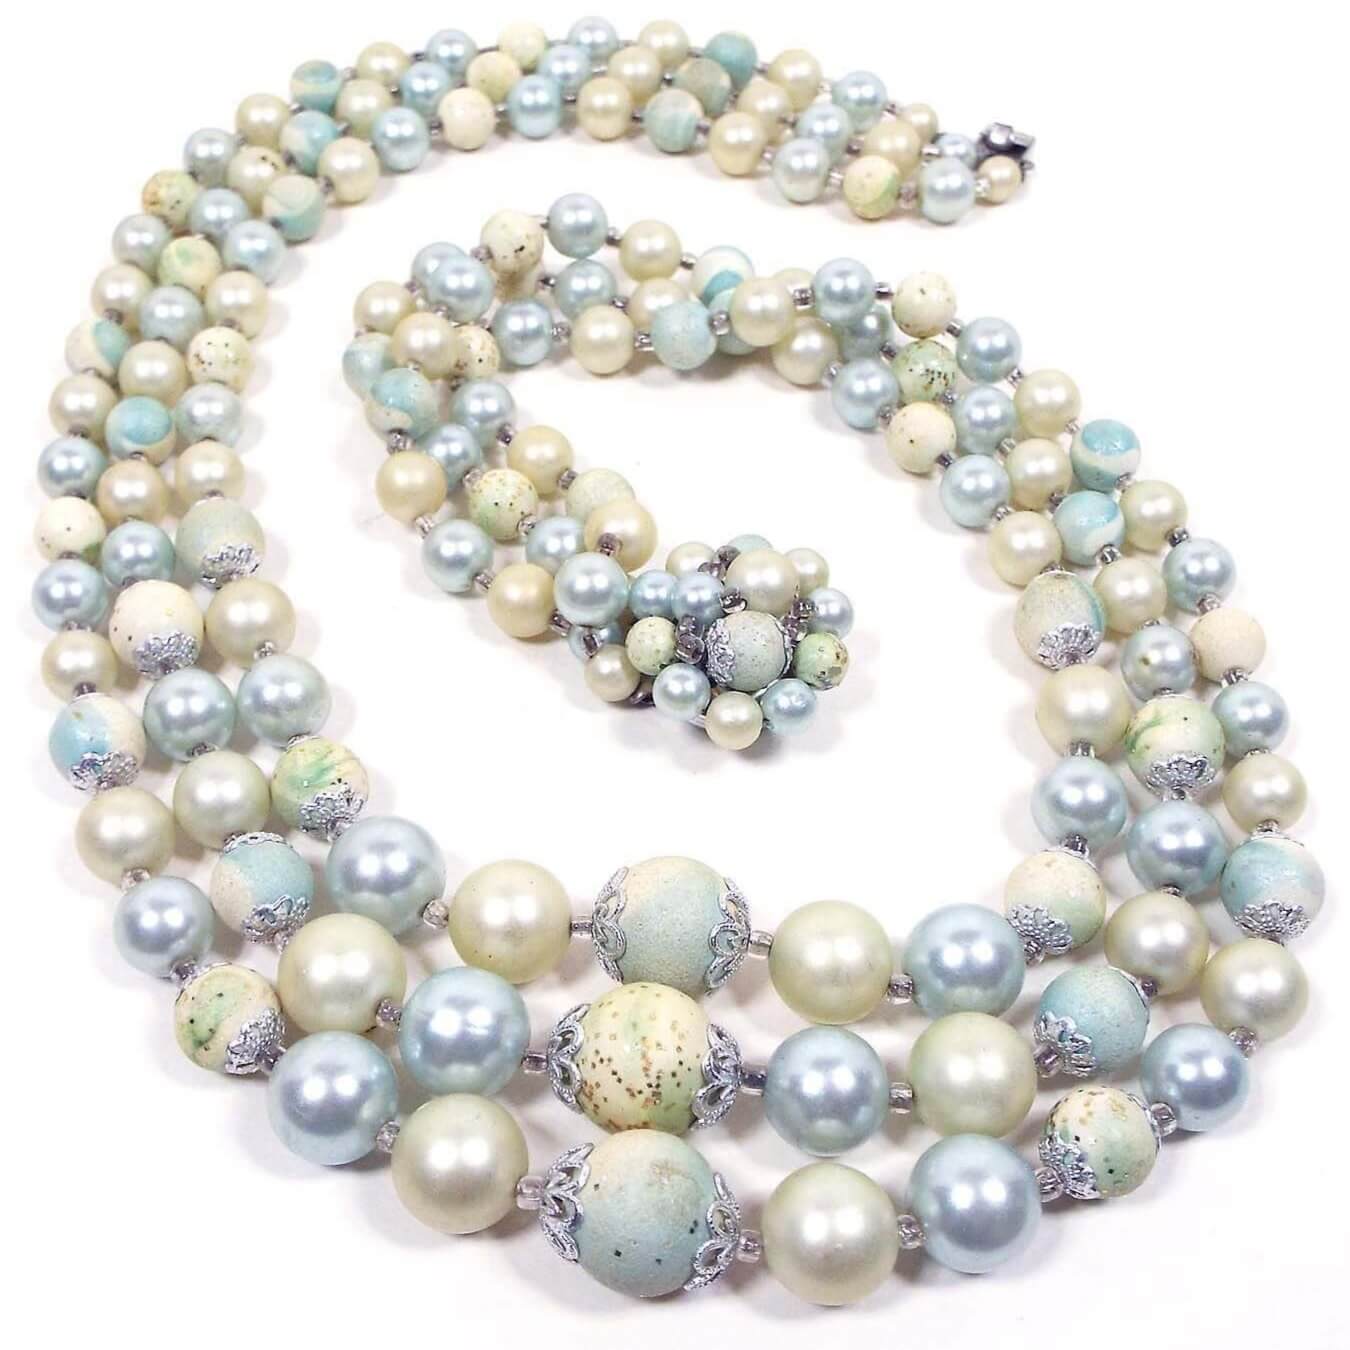 Top view of the Mid Century vintage Japan pastel beaded multi strand necklace. It has three rows of round plastic beads in light blue and yellow, along with some faux pearls in off white. There is a beaded box clasp at the end. 